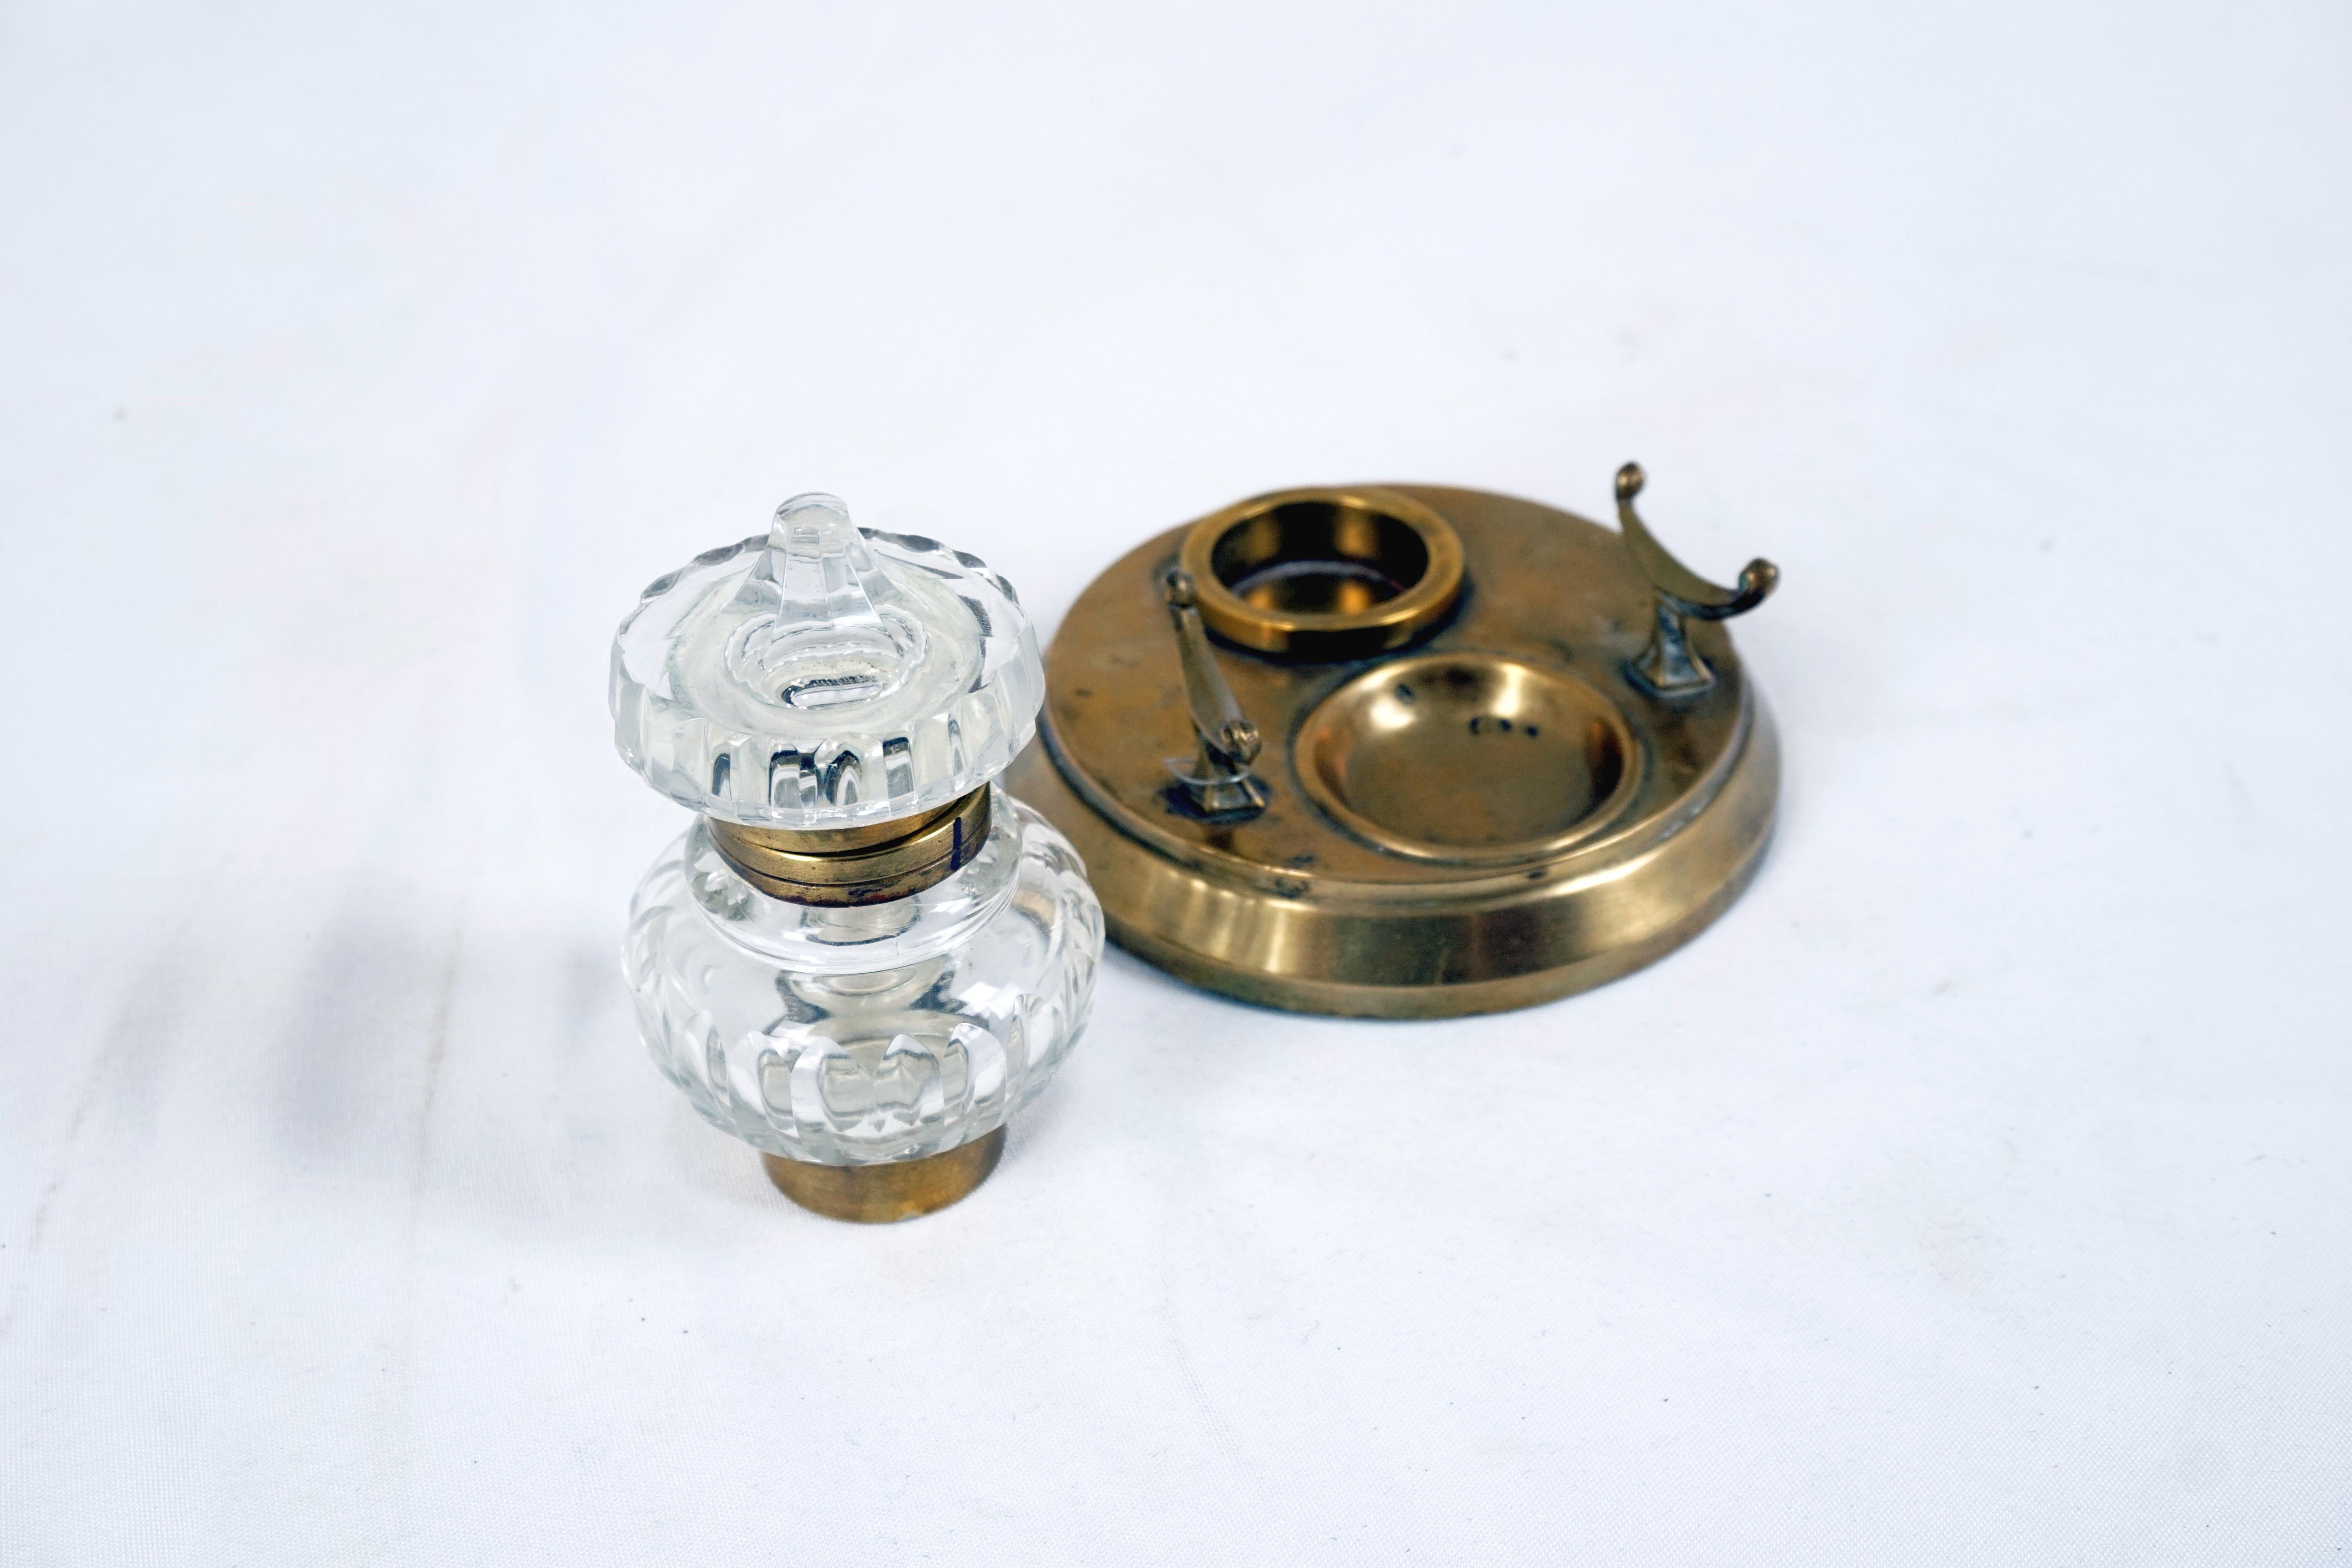 Antique Brass Inkstand, Circular Inkwell, With Pen Rest, Scotland 1910, H557 In Good Condition For Sale In Vancouver, BC